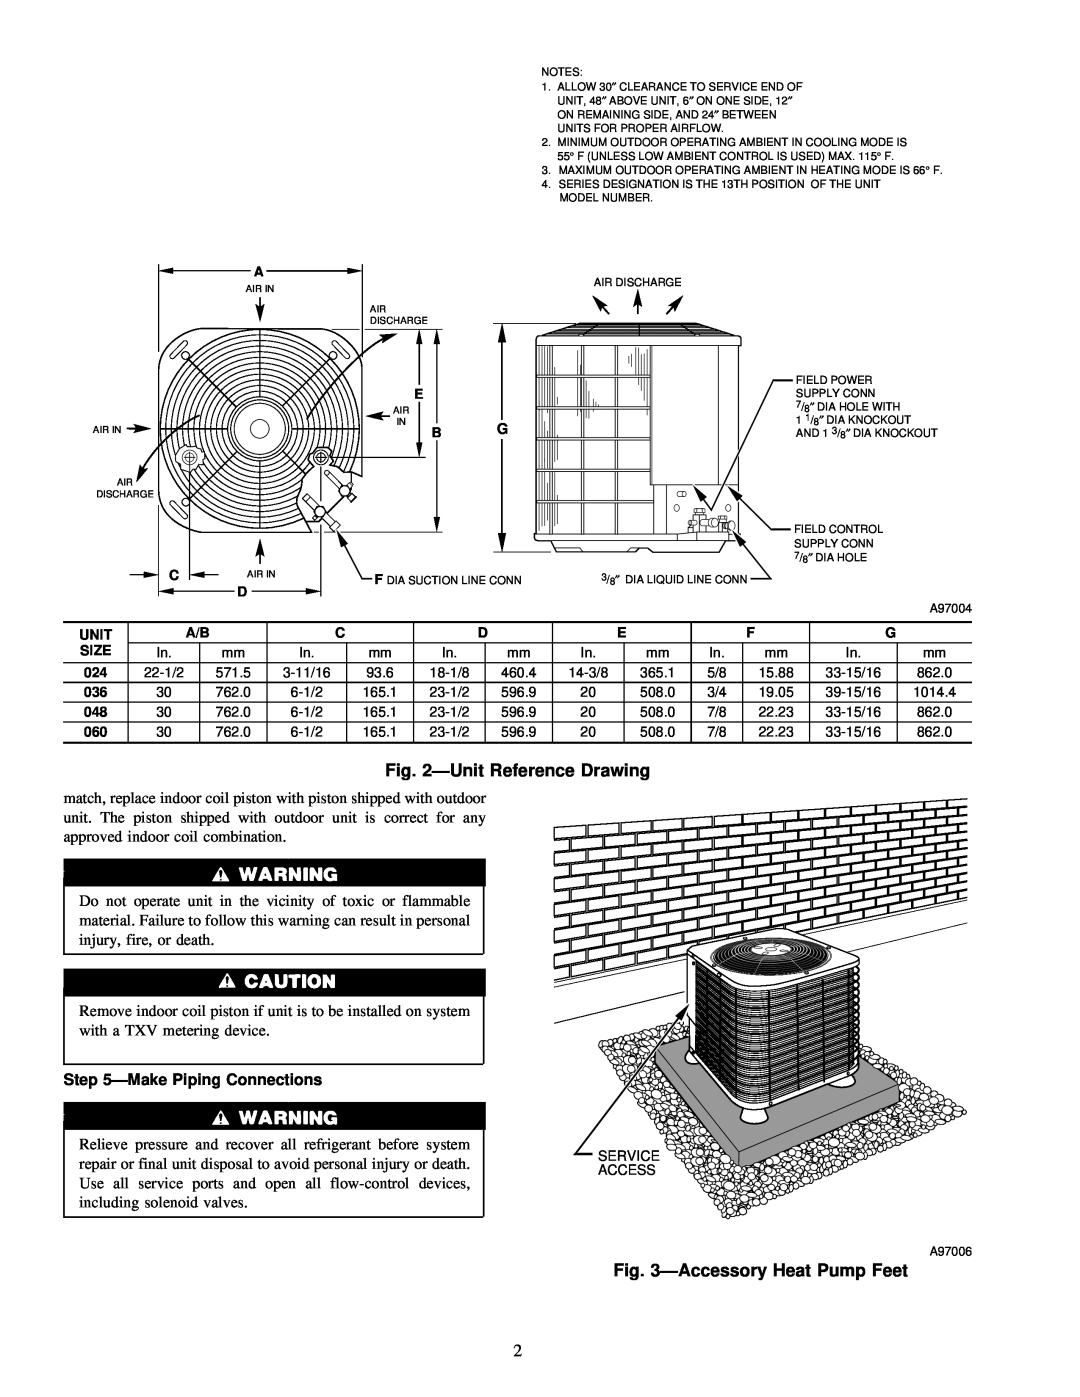 Carrier 38YCX instruction manual UnitReference Drawing, AccessoryHeat Pump Feet, MakePiping Connections 